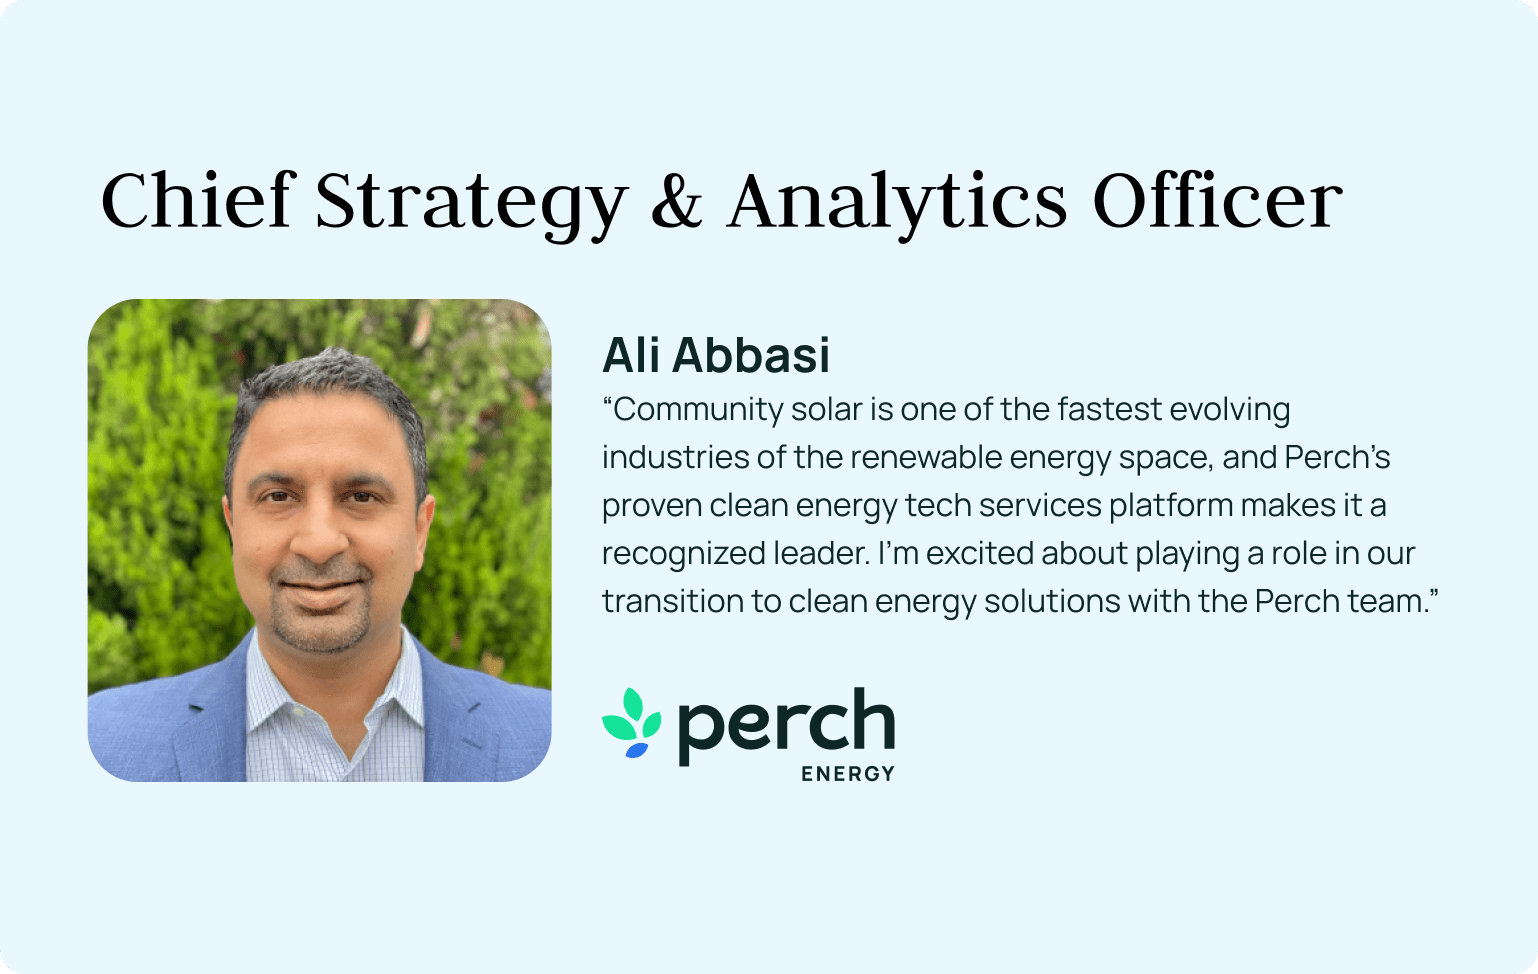 chief-strategy-analytics-officer-perch-energy